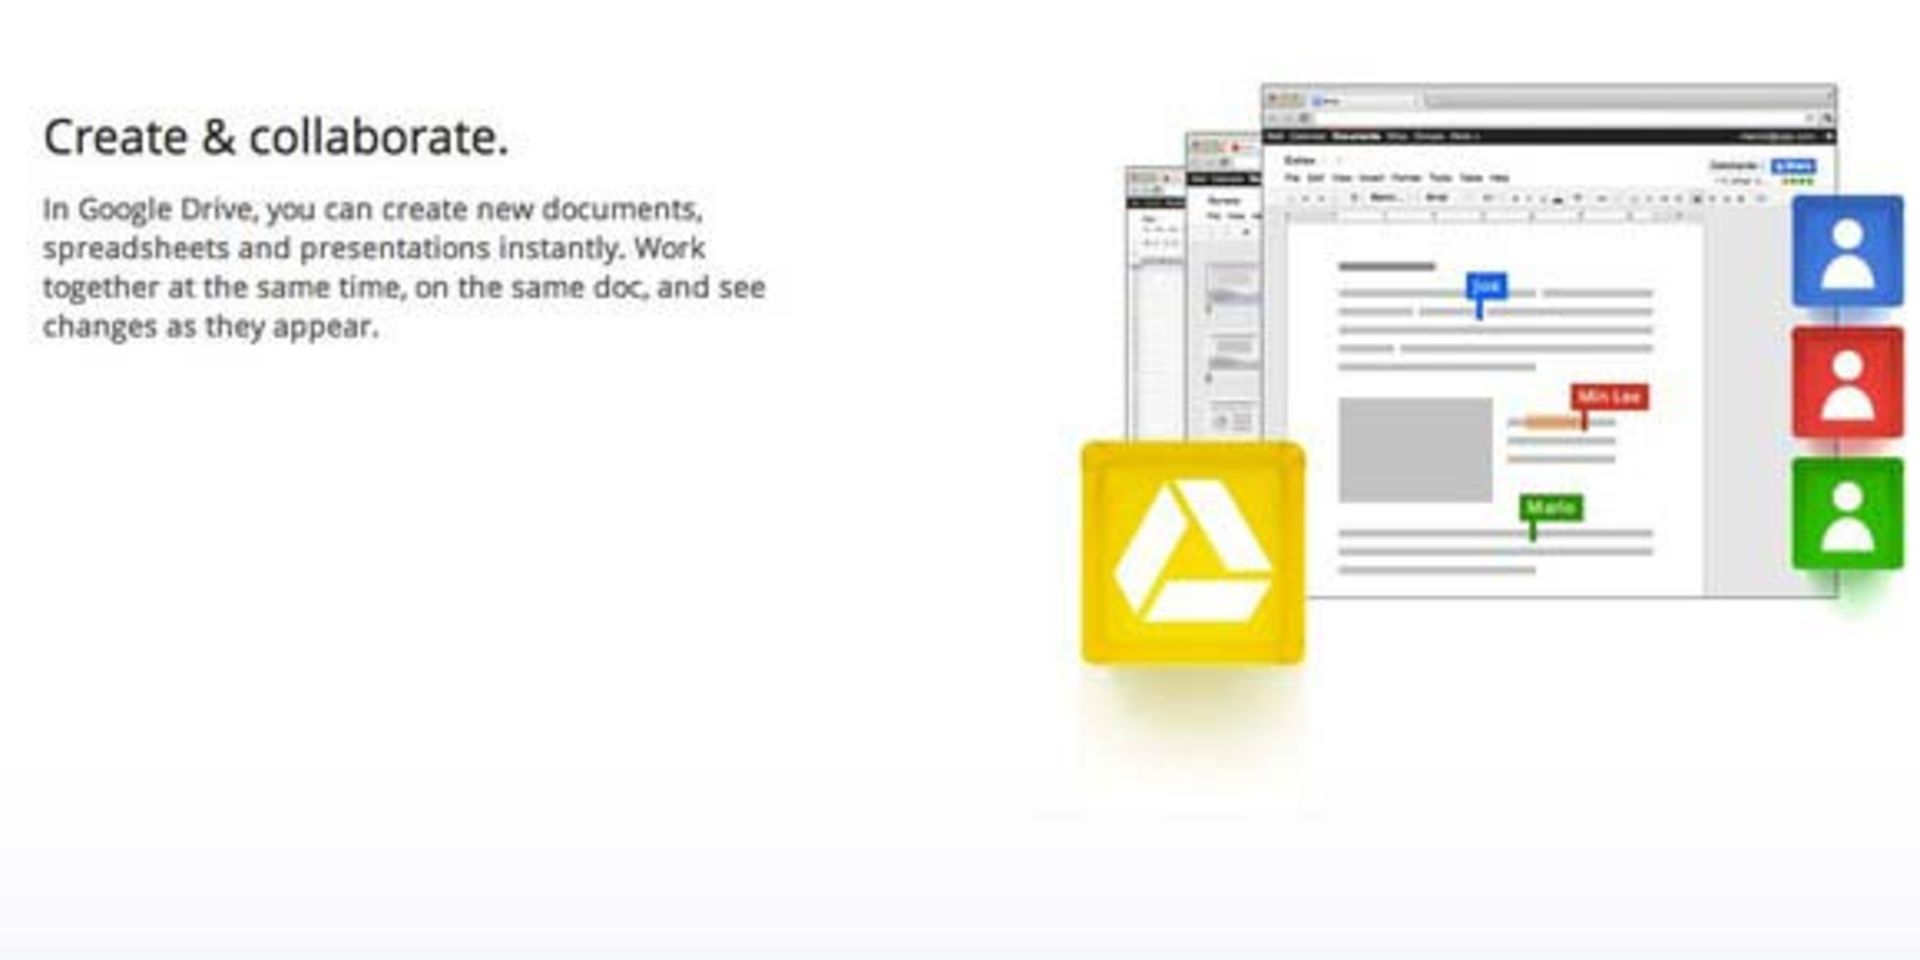 2Google-Drive-Create-and-Collaborate-580-90